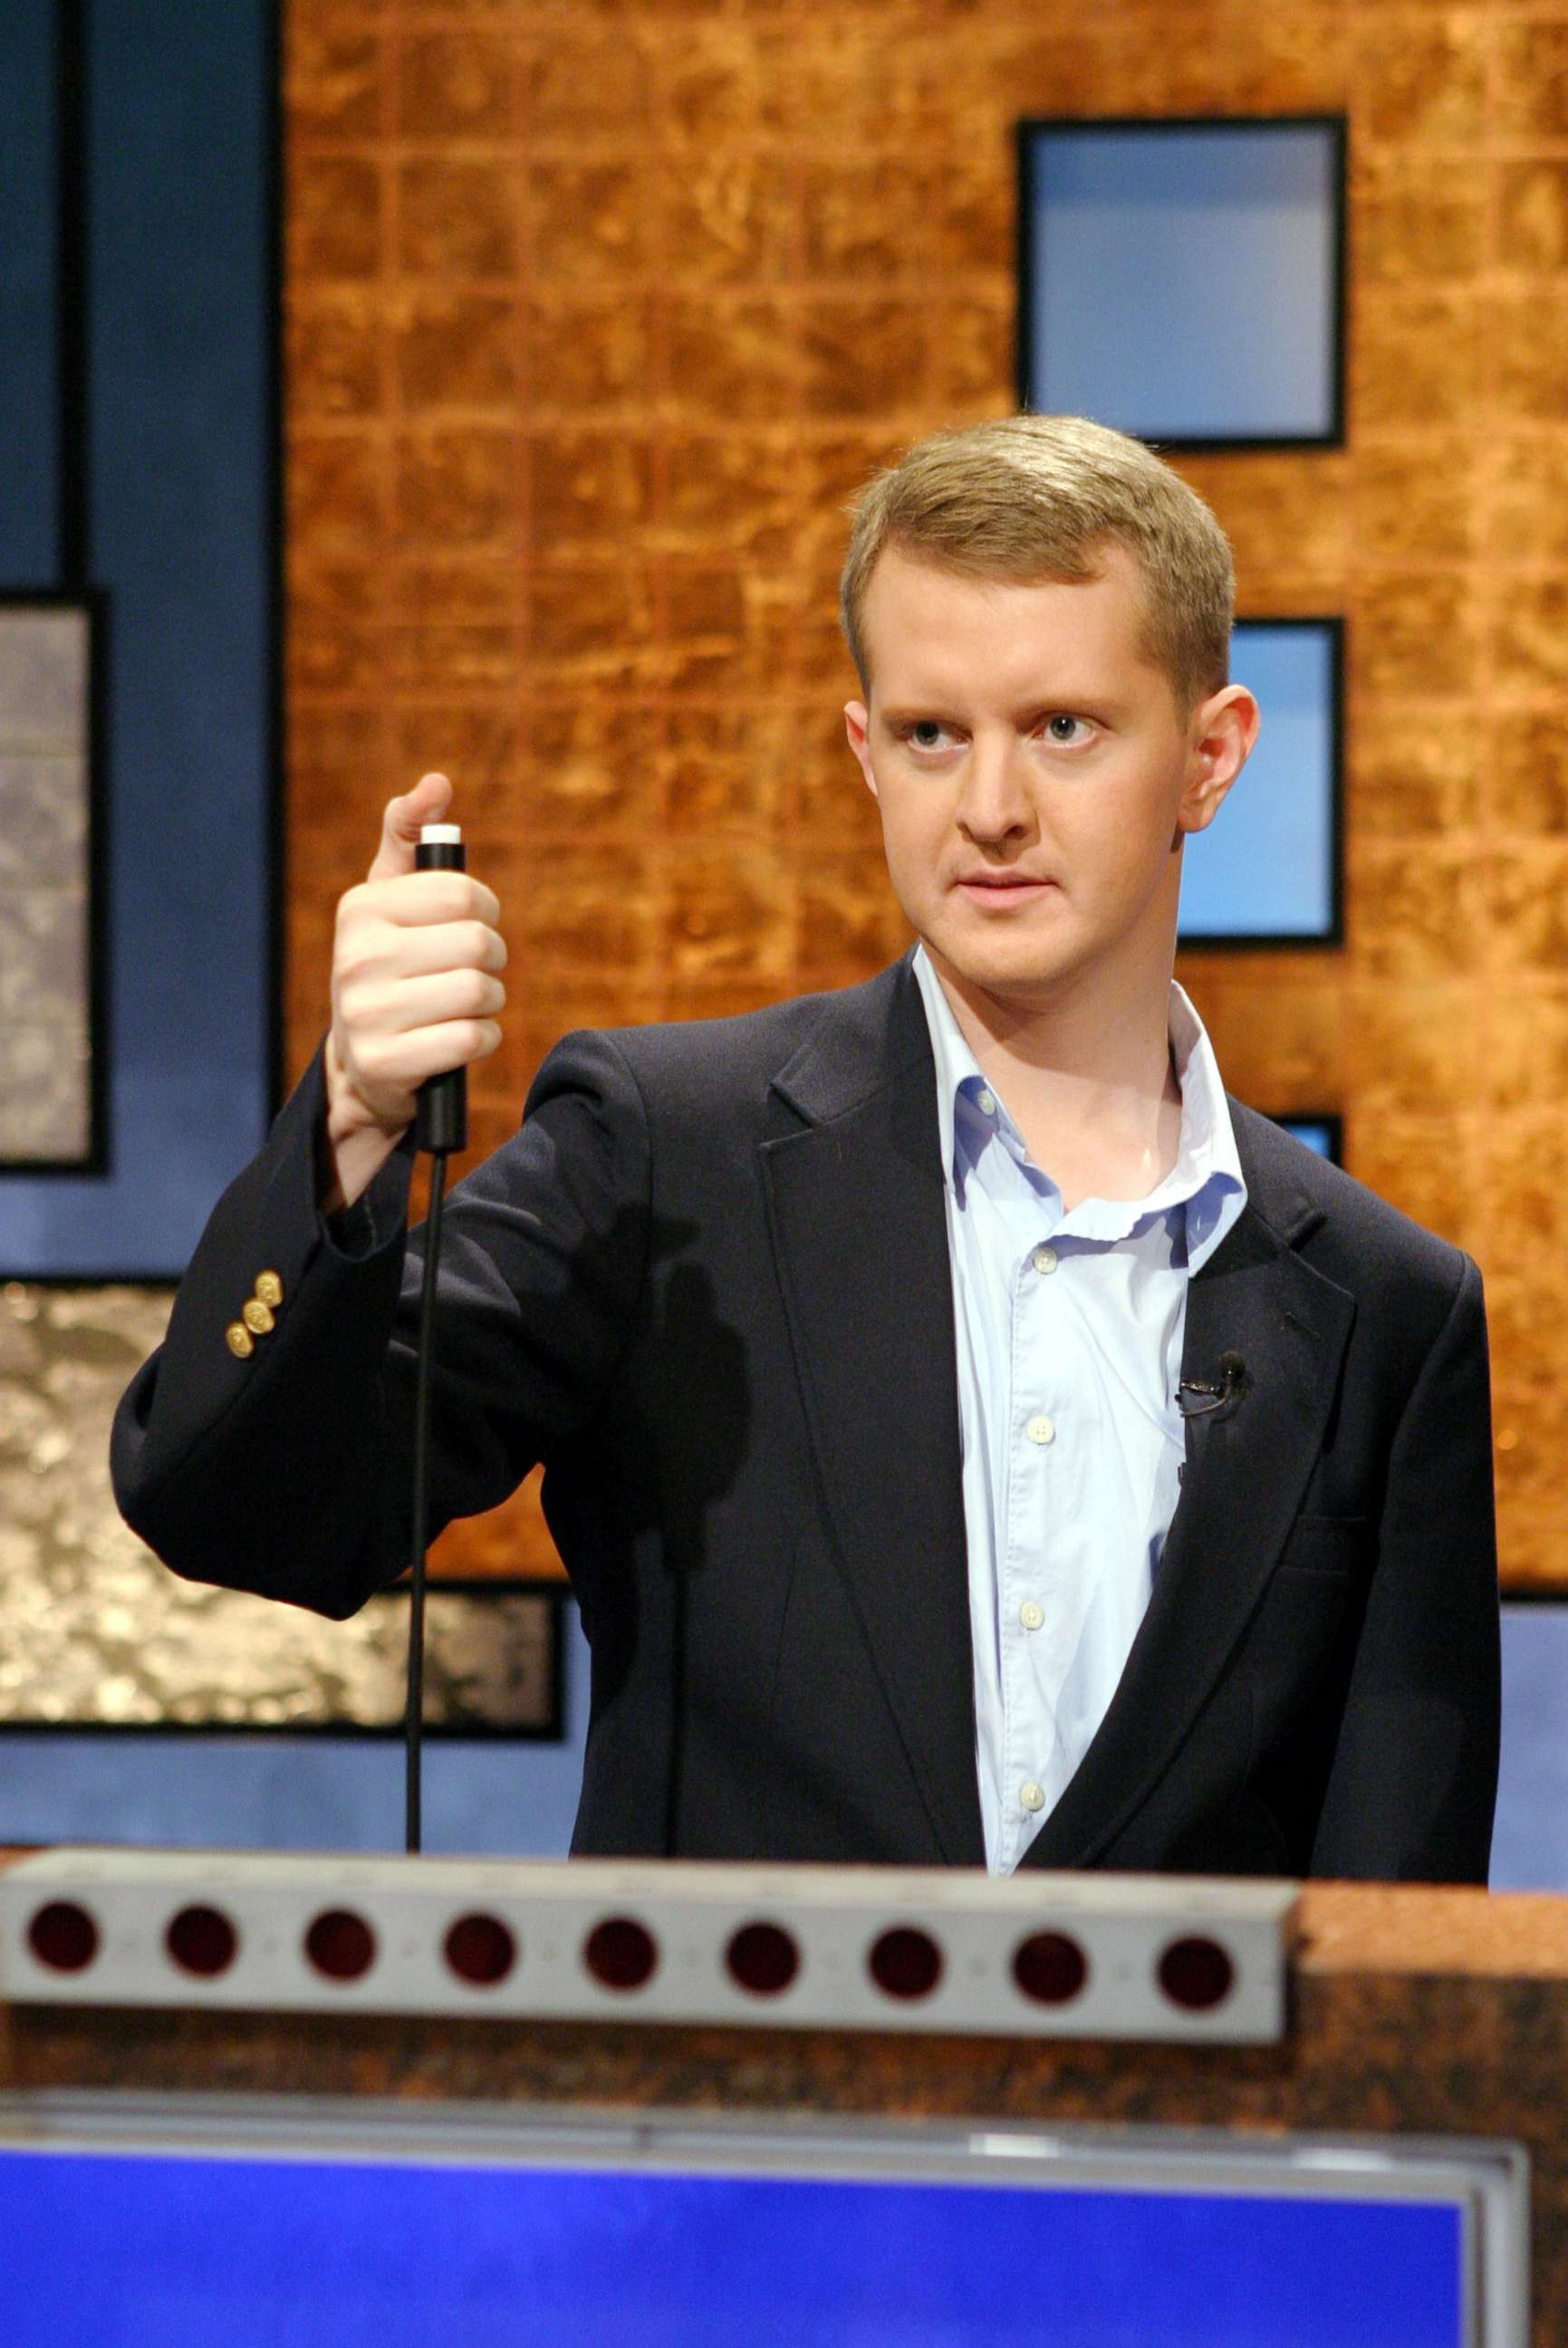 PHOTO: Ken Jennings poses in this undated handout photo from "Jeopardy."